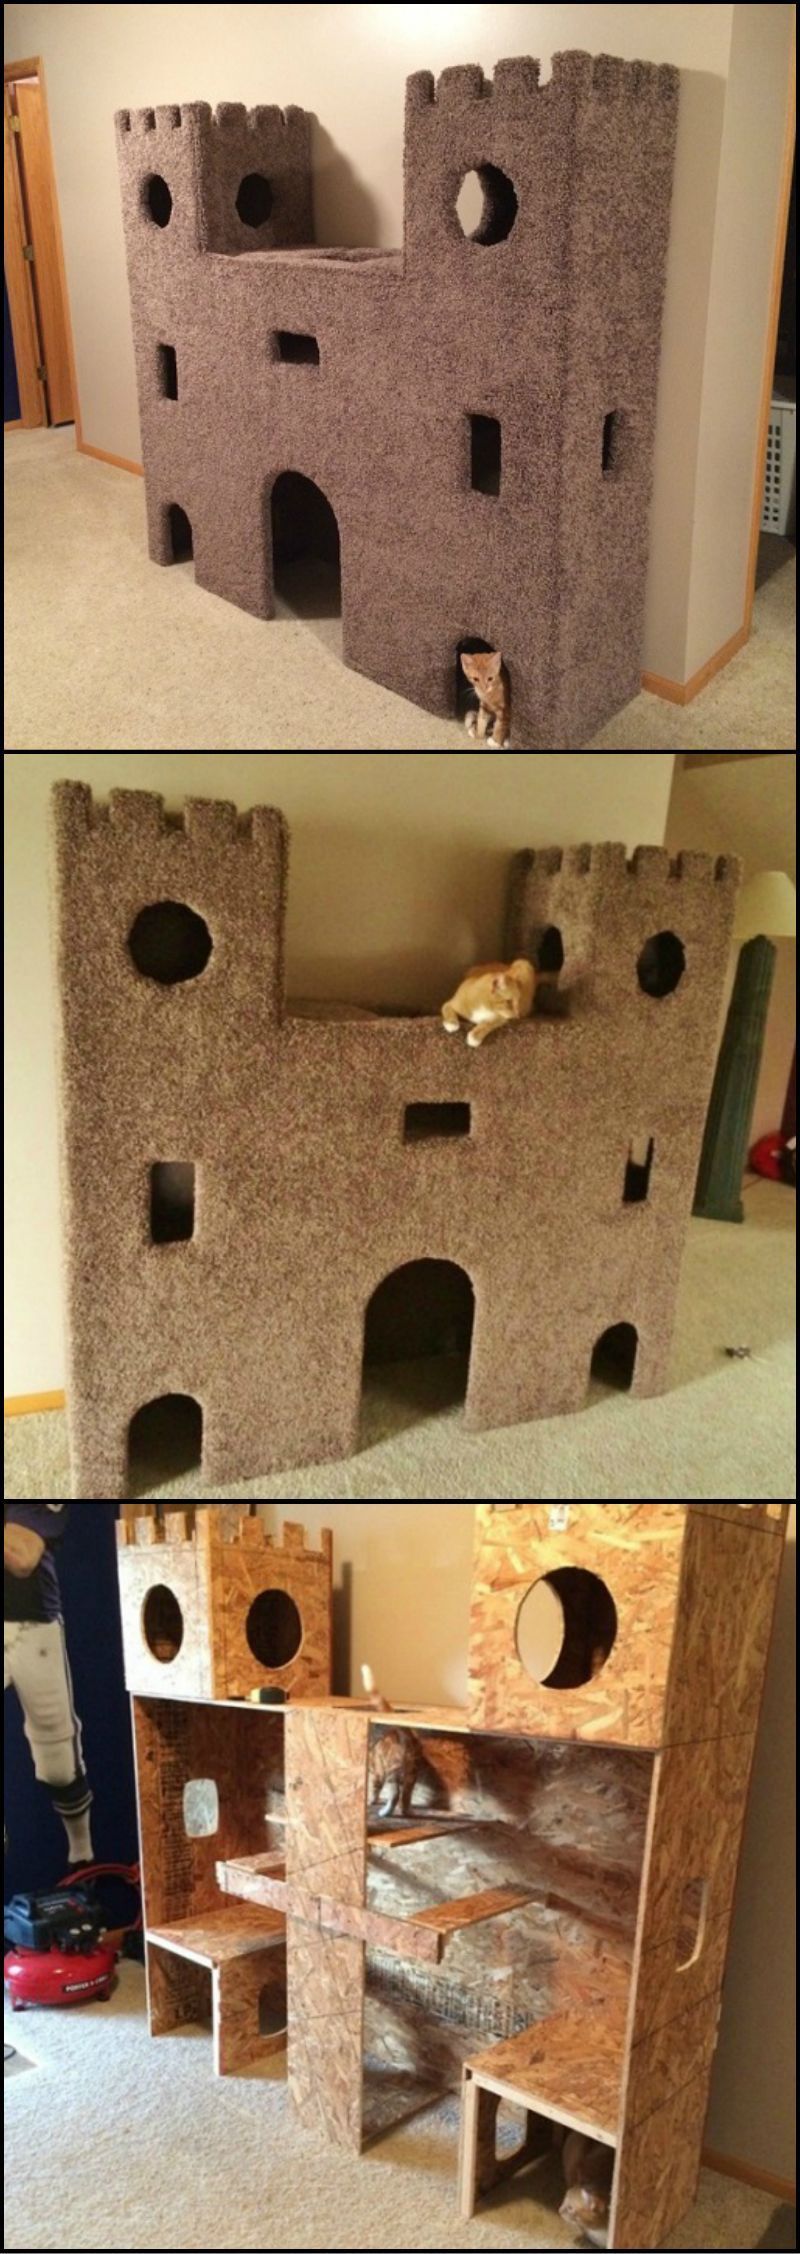 We found the ultimate cat castle! This is a great idea to keep our indoor cats bus